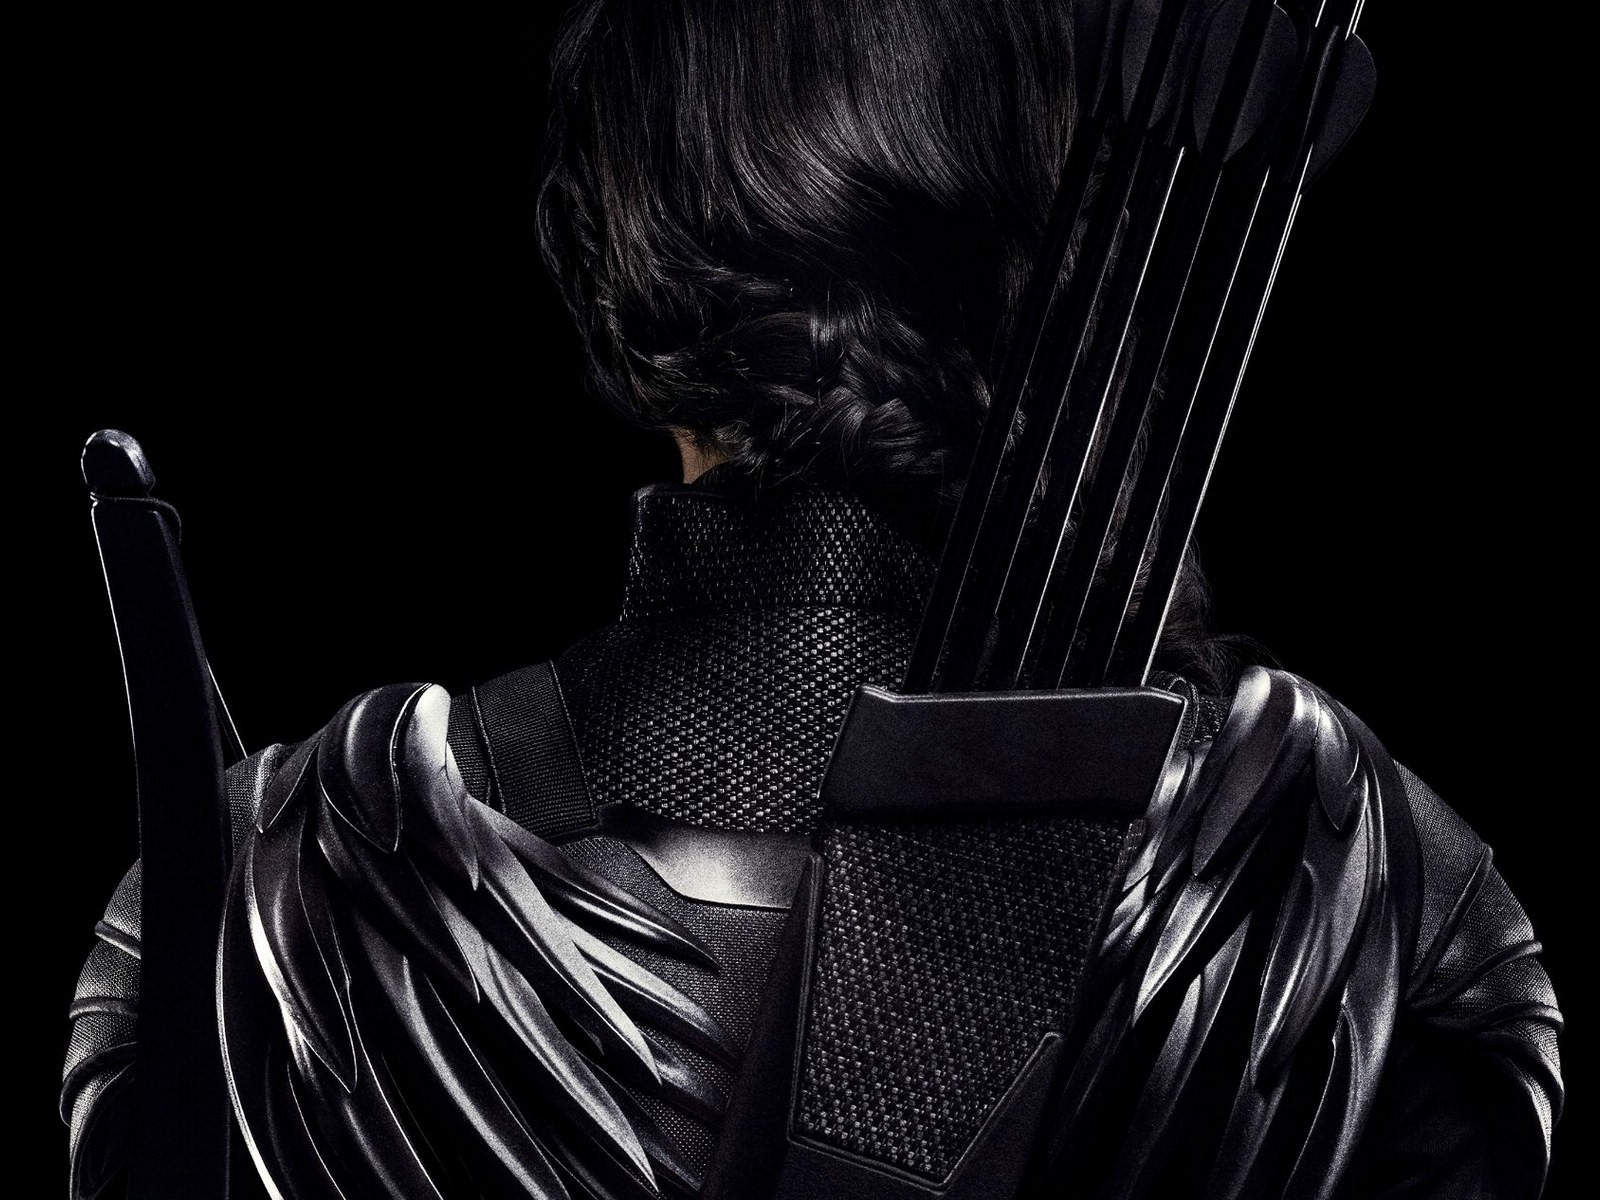 The Hunger Games: Mockingjay HD wallpapers #6 - 1600x1200